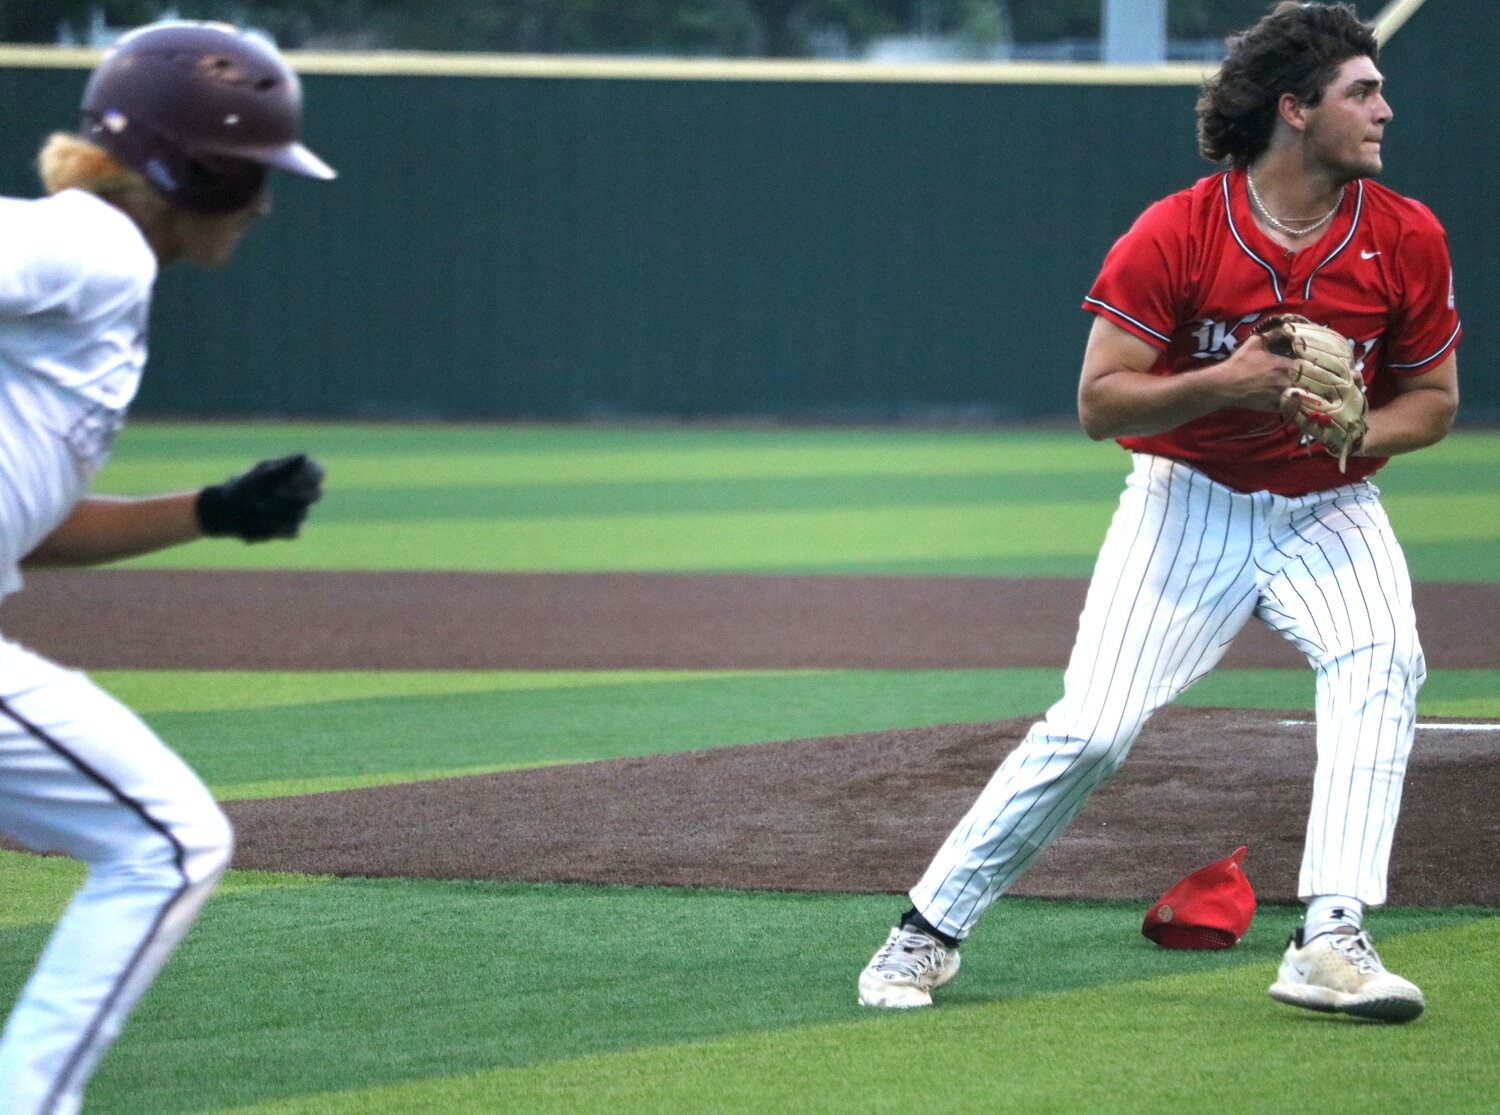 Cole Kaase throws a ball to first base during Friday's area round game between Katy and Cy-Fair at Langham Creek.